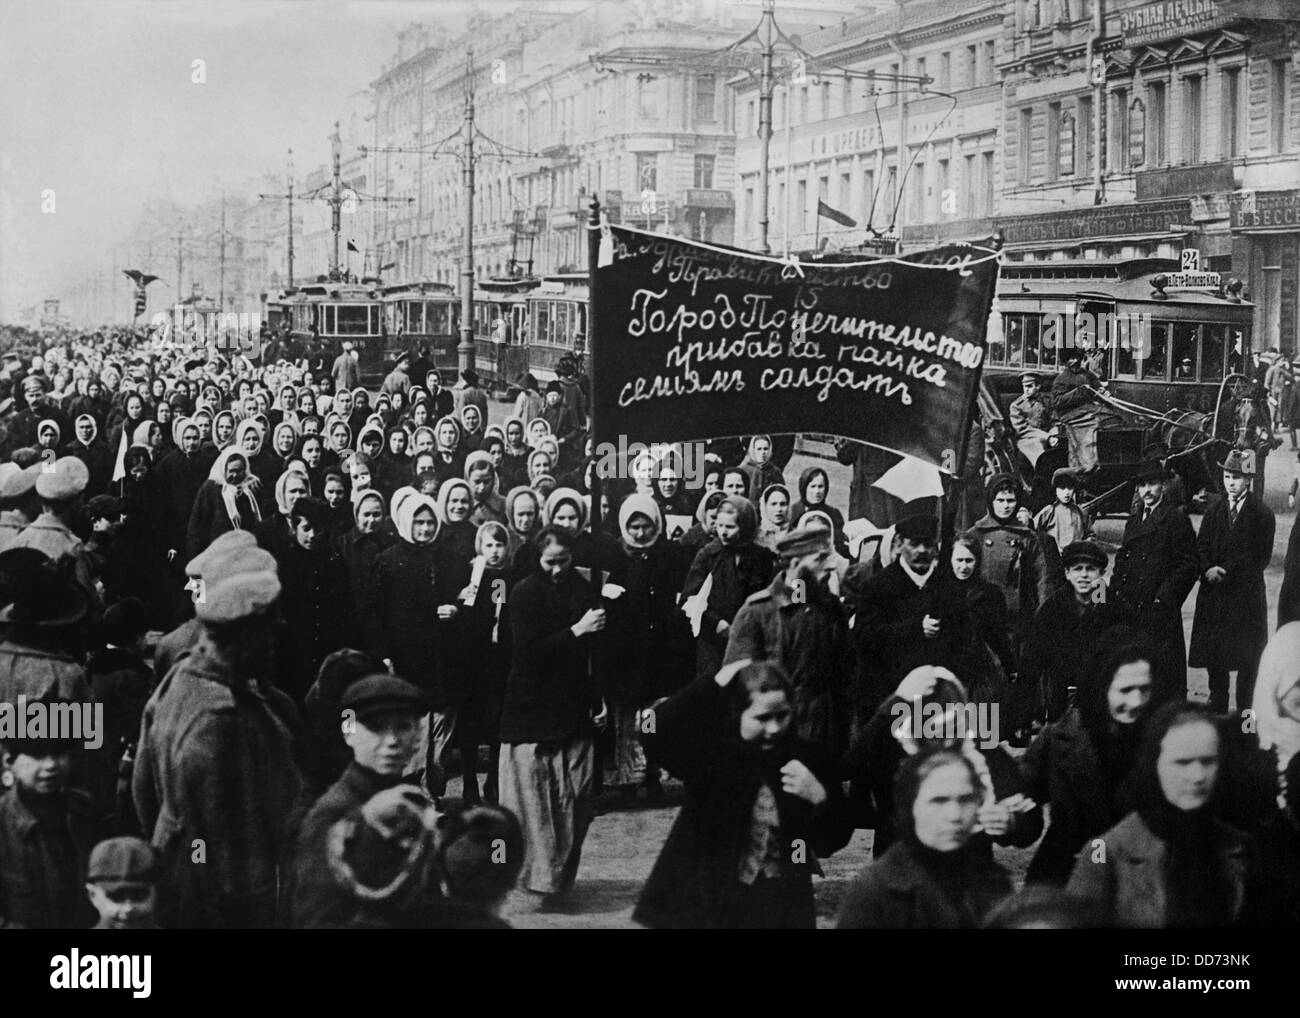 St. Petersburg Women parade during the Russian Revolution, 1917. (BSLOC 2013 4 220) Stock Photo